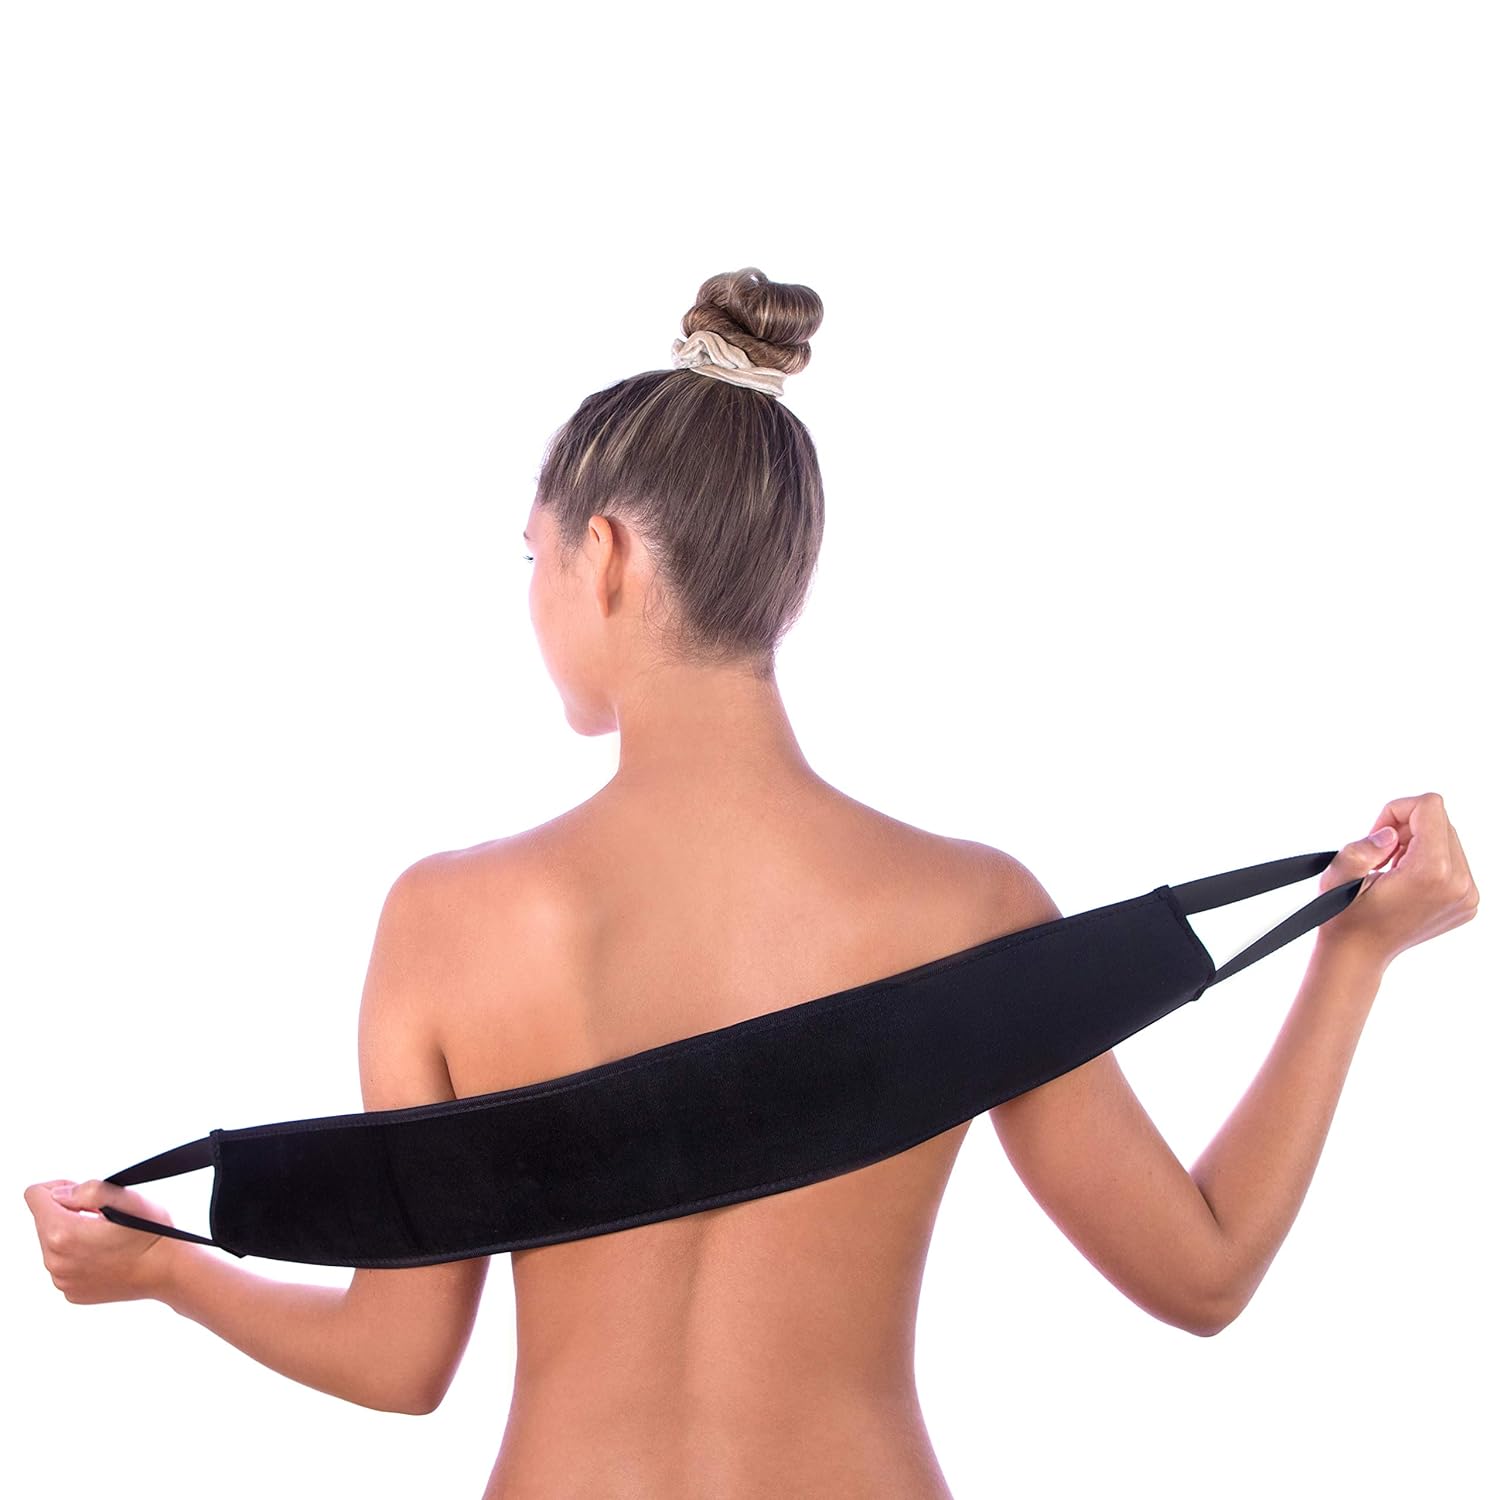 Self Tanner Back Applicator - Use With Self Tanner or Any Self Tan Product, Sunless Tanning Back Applicator, Back Lotion Applicator, Tanning Mitt for Back